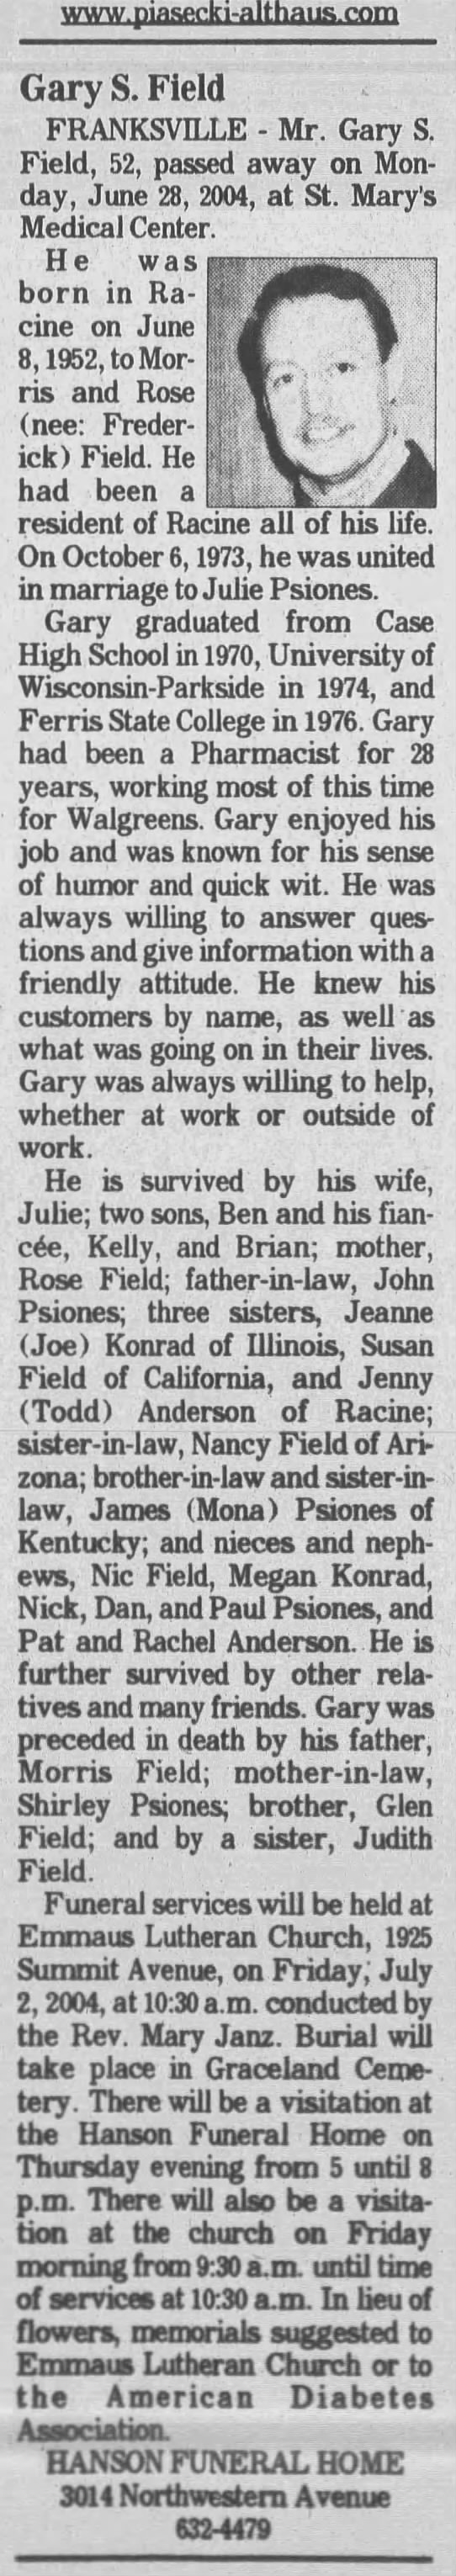 Obituary for Gary S. Field, 1952-2004 (Aged 52)